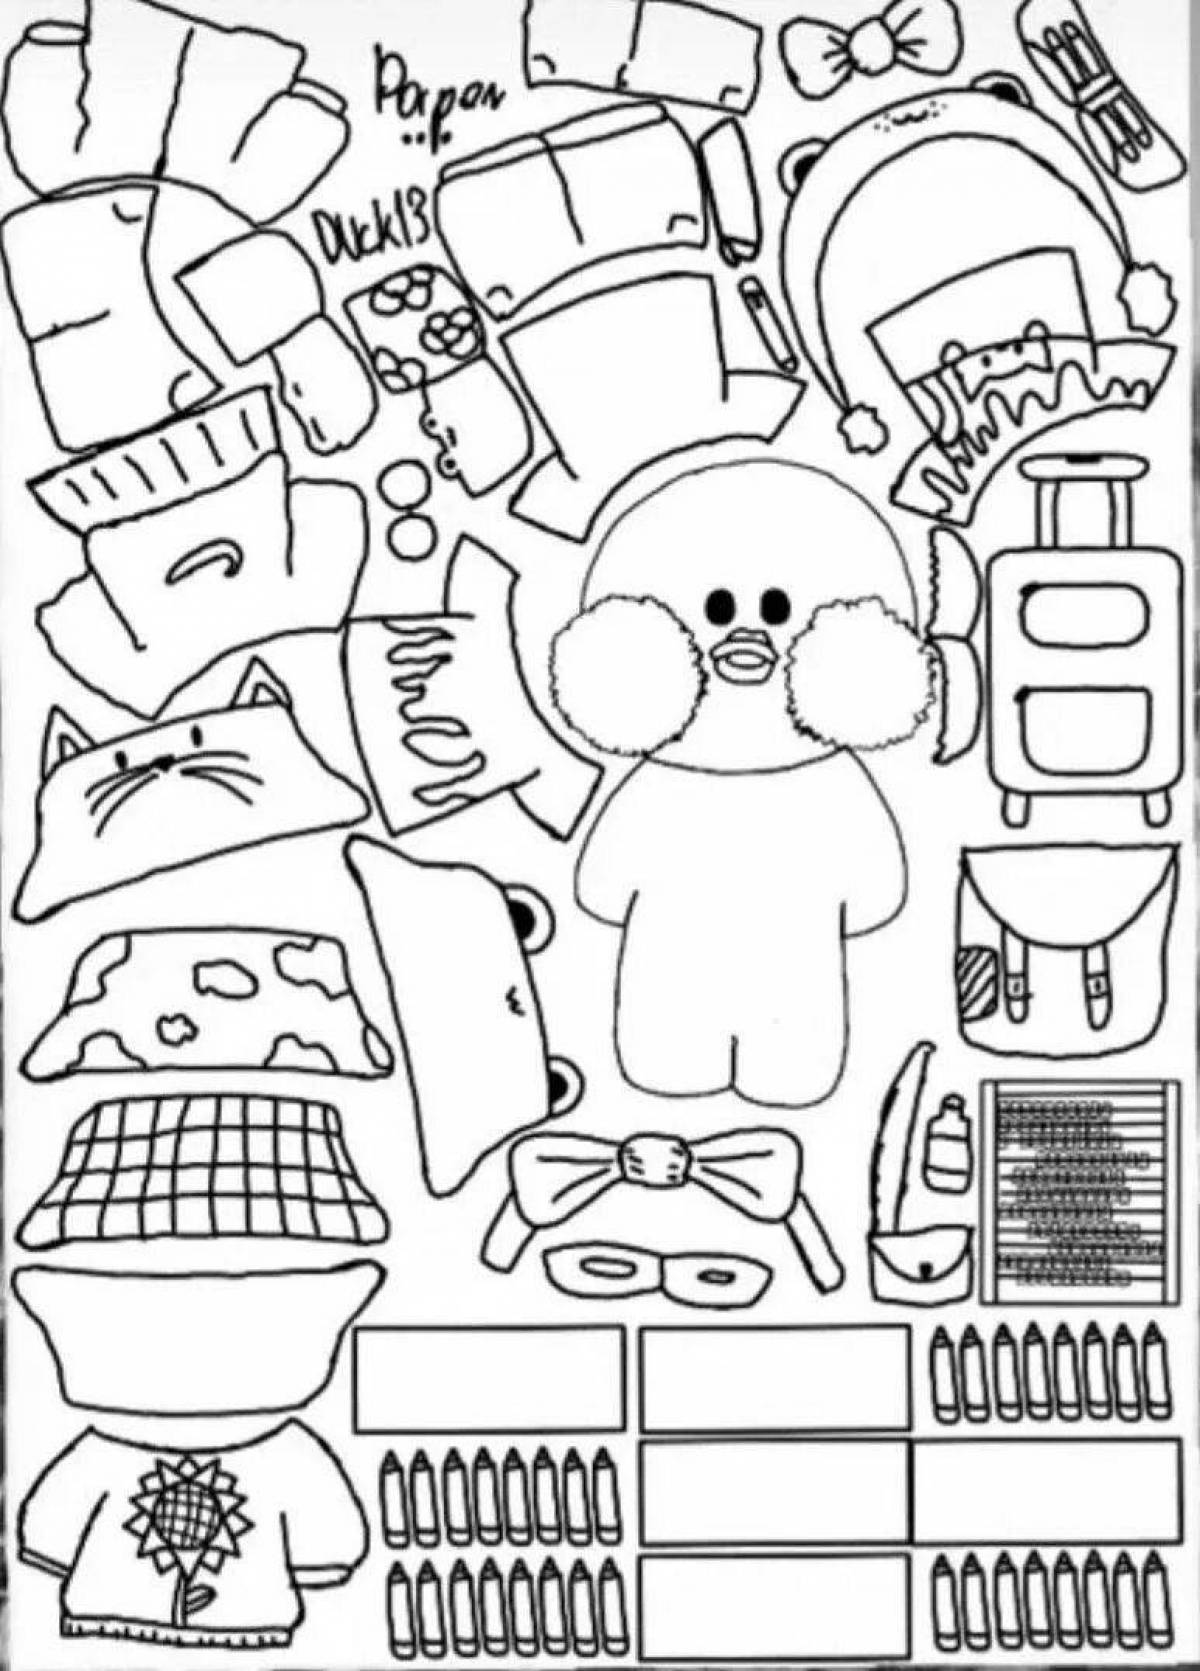 Colorful explosive lolofan duck coloring page